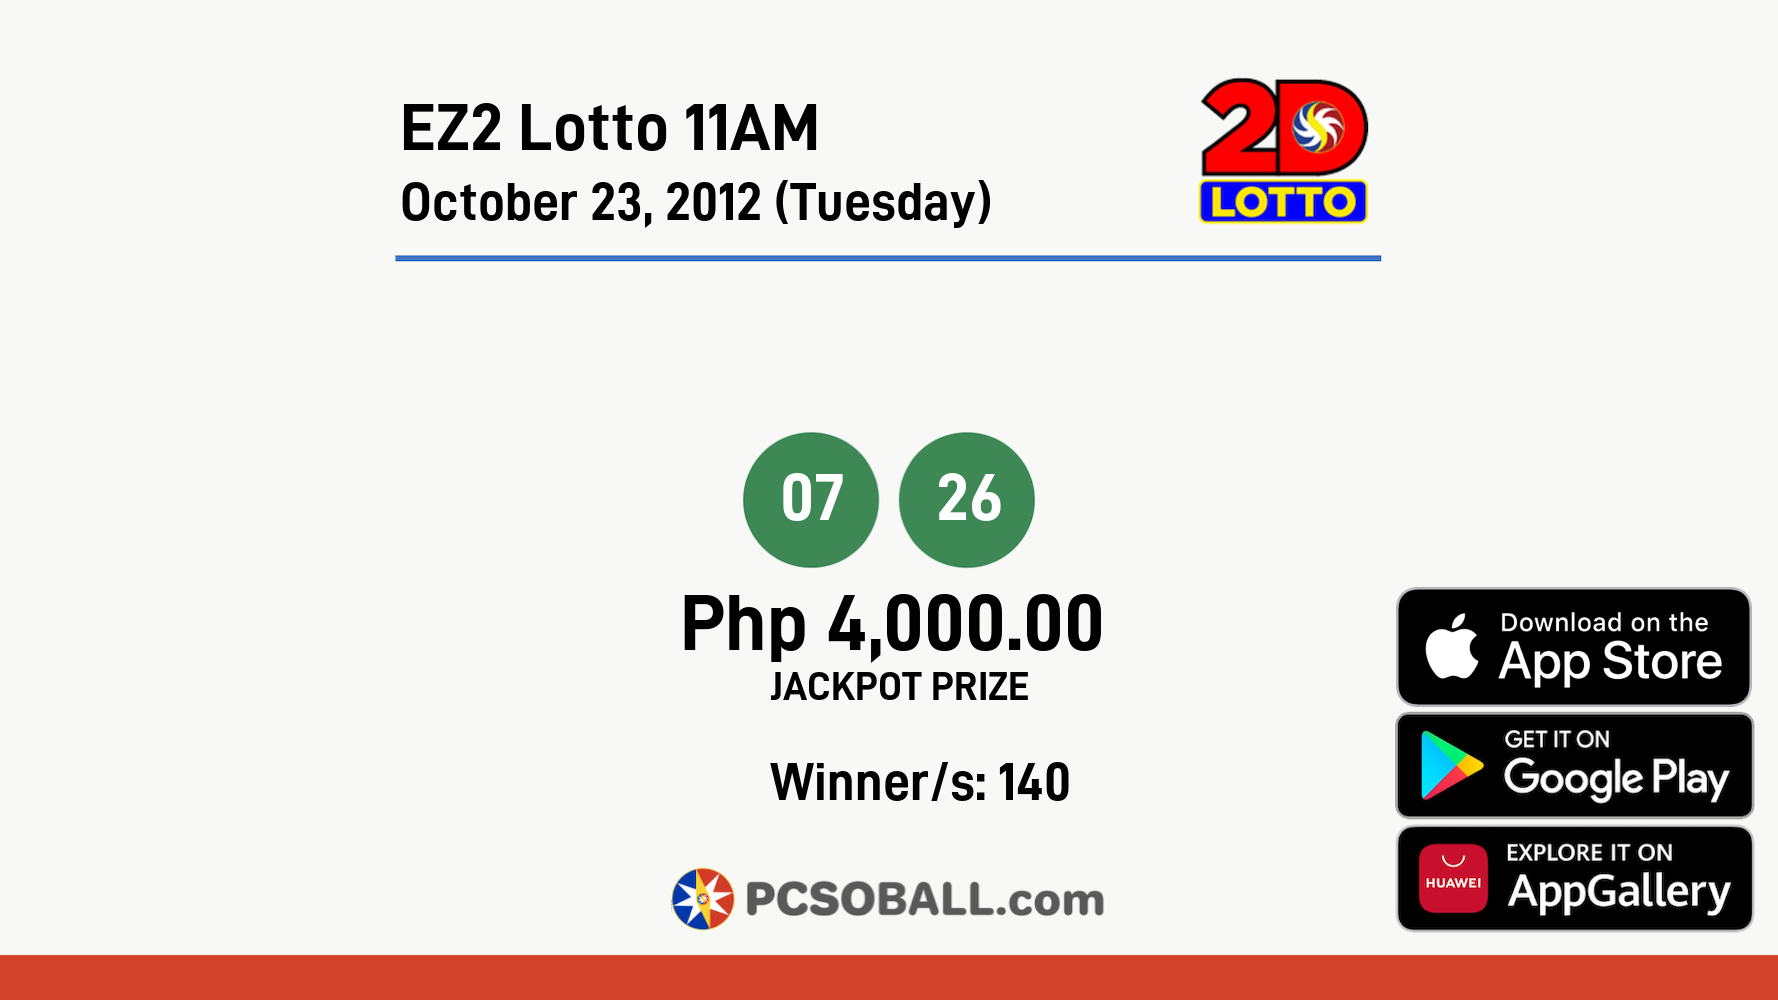 EZ2 Lotto 11AM October 23, 2012 (Tuesday) Result